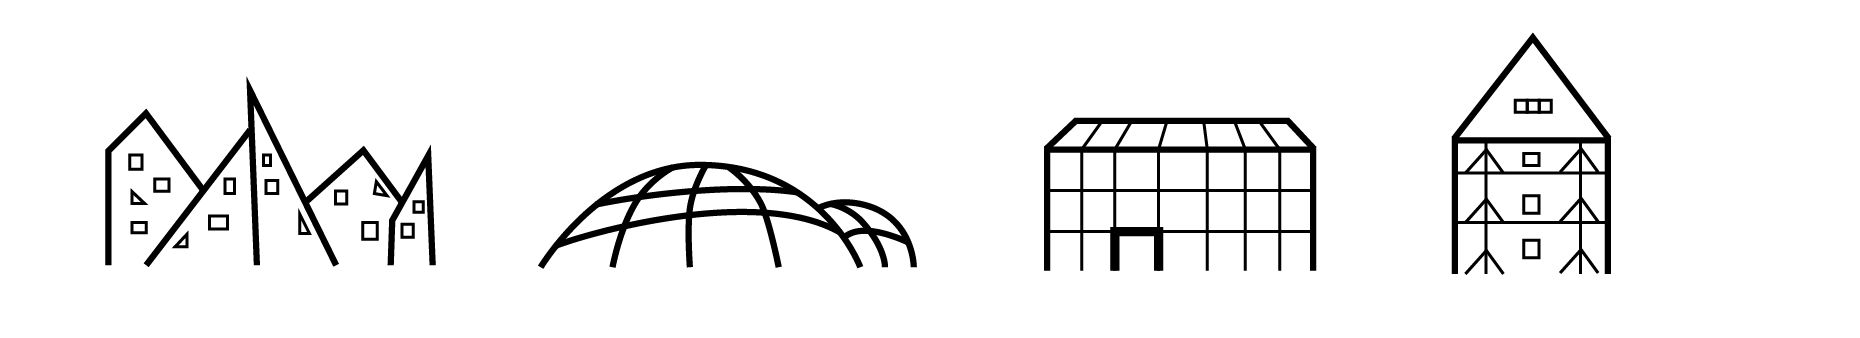 Custom icons of buildings in Aarhus - The iceberg, the botanic garden, musikhuset and the old city